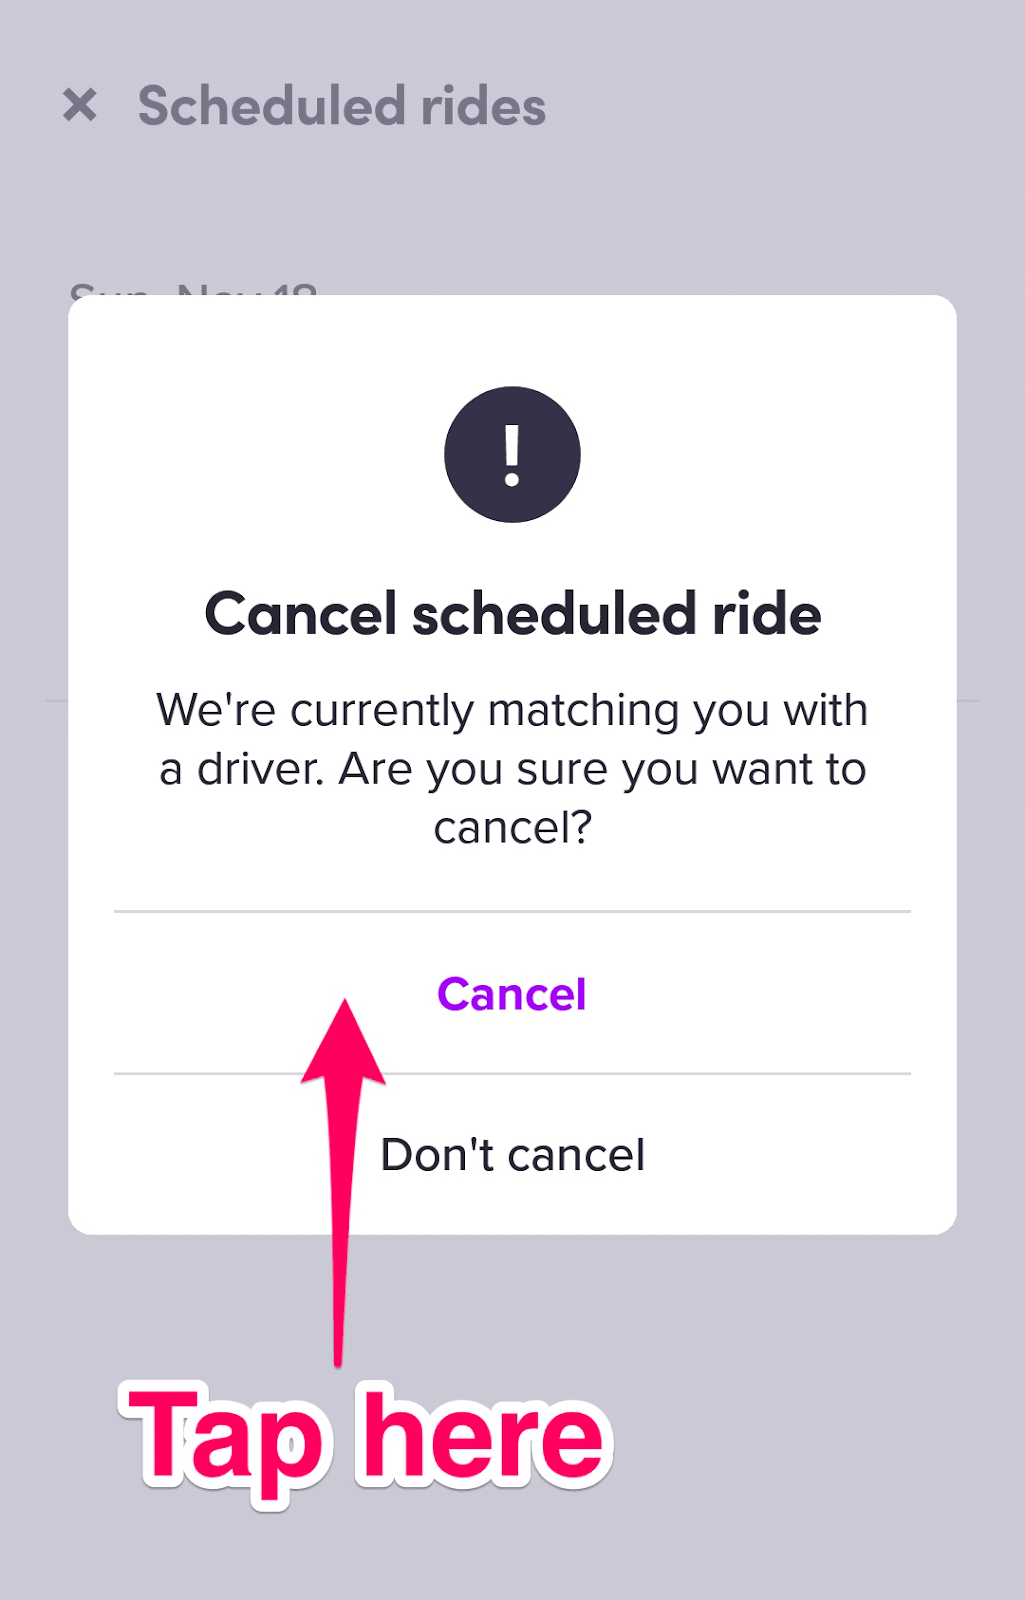 How to Schedule a Lyft Ride - Confirm cancellation